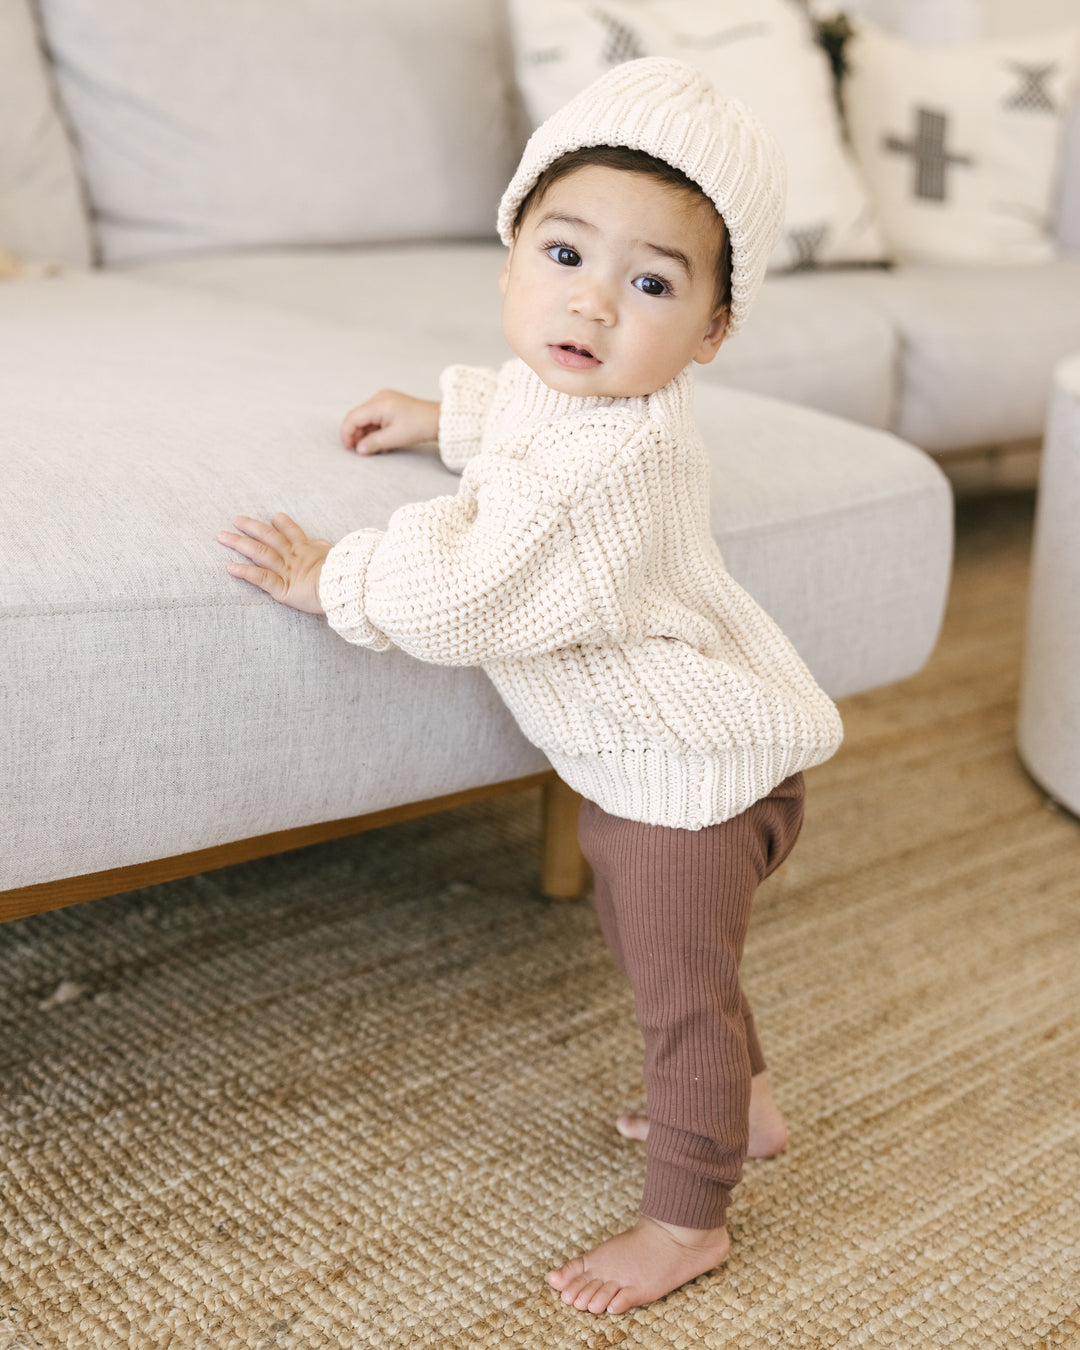 Chunky Knit Sweater | Natural - FINAL SALE